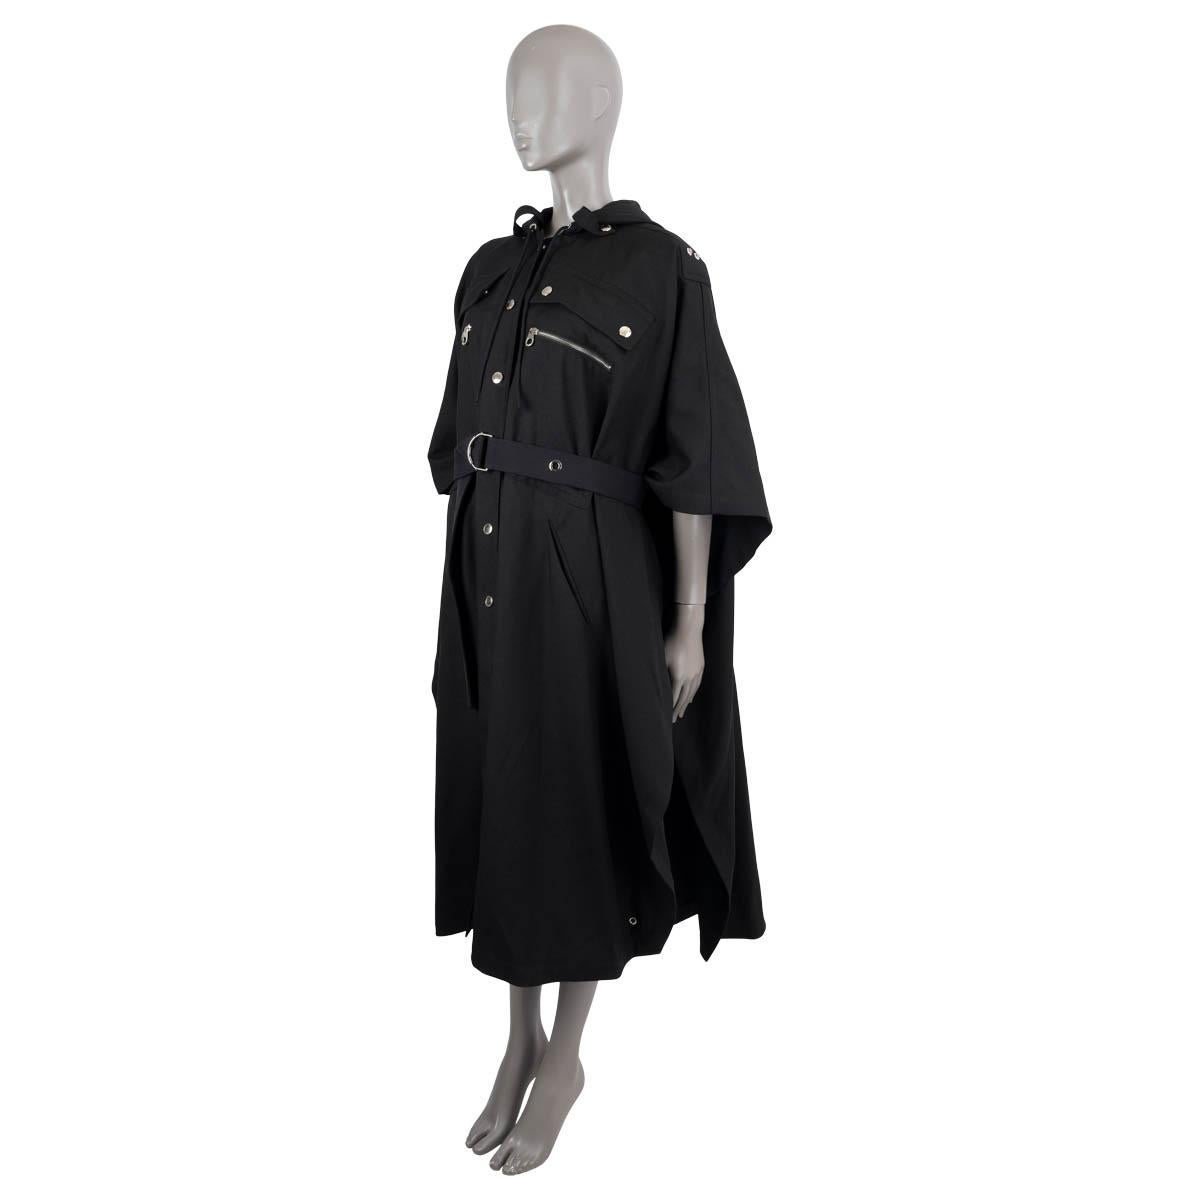 100% authentic Chloé hooded cape in black wool gaberdine (100%). Features a longline silhouette with cinched-in waist reminiscent of a parka, a belt, two zip pocket on the chest and on on the back. Can be converted to a sleeveless version with